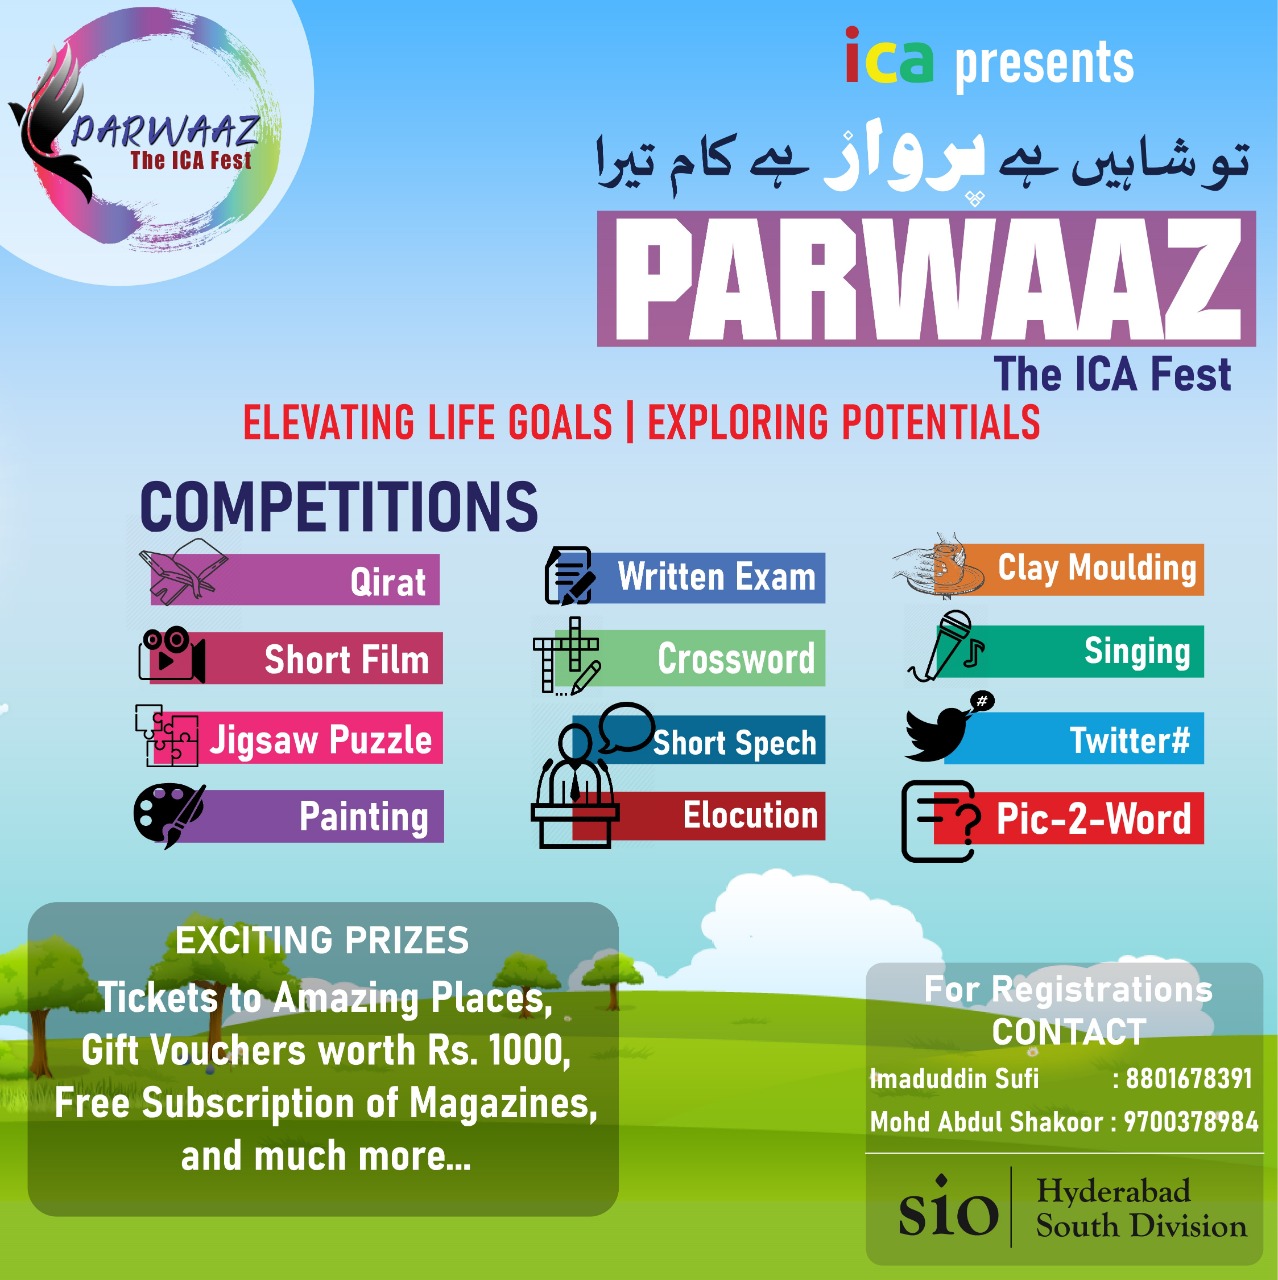 SIO Hyderabad South Conducting Parwaaz- The ICA Fest